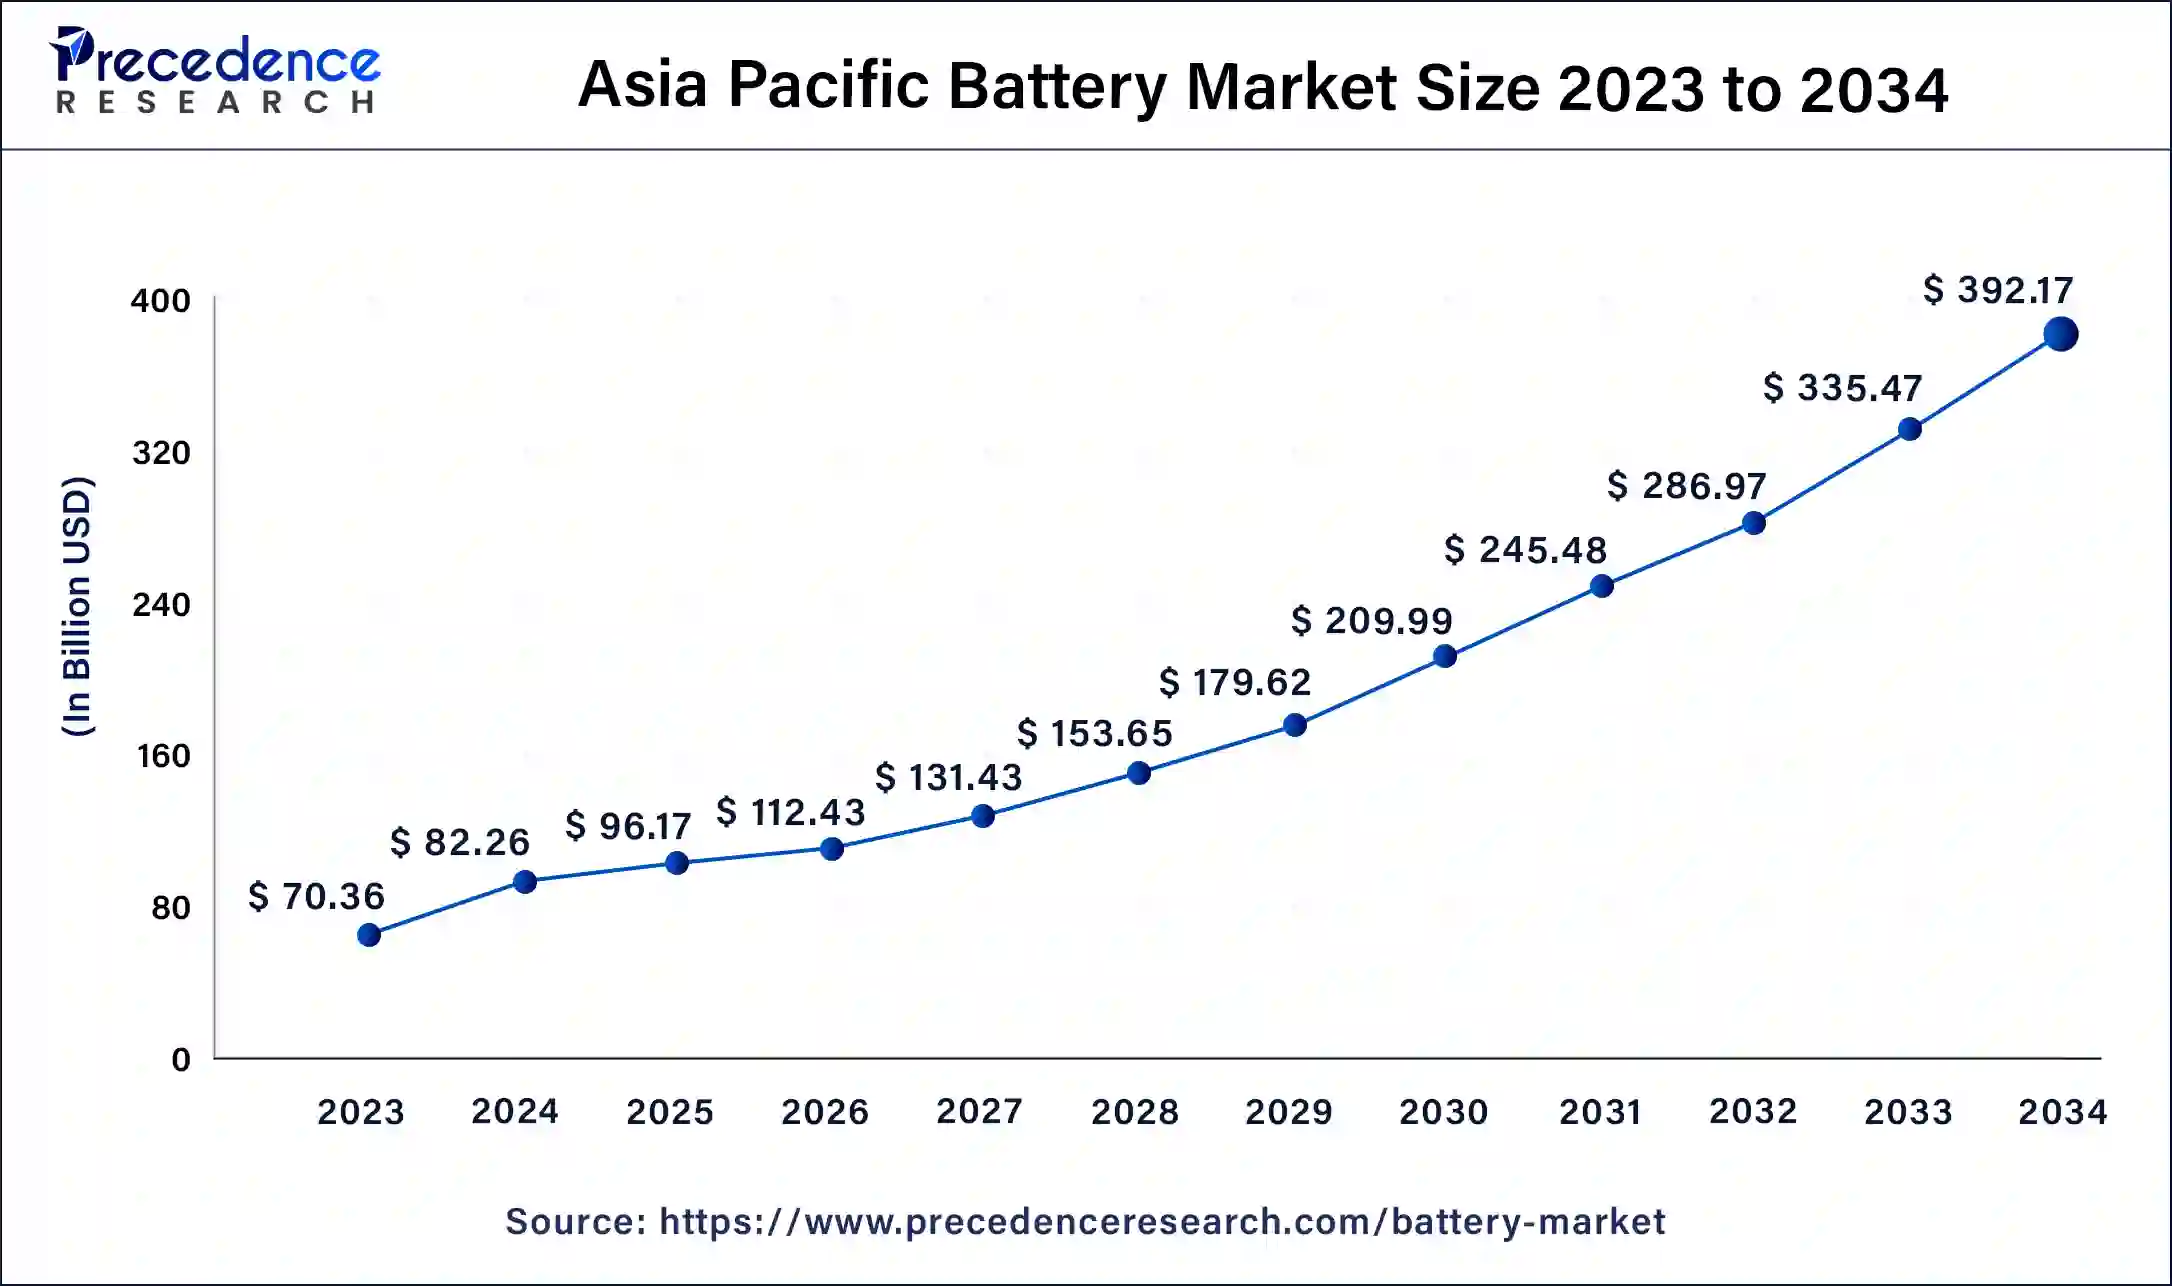 Asia Pacific Battery Market Size 2024 to 2034